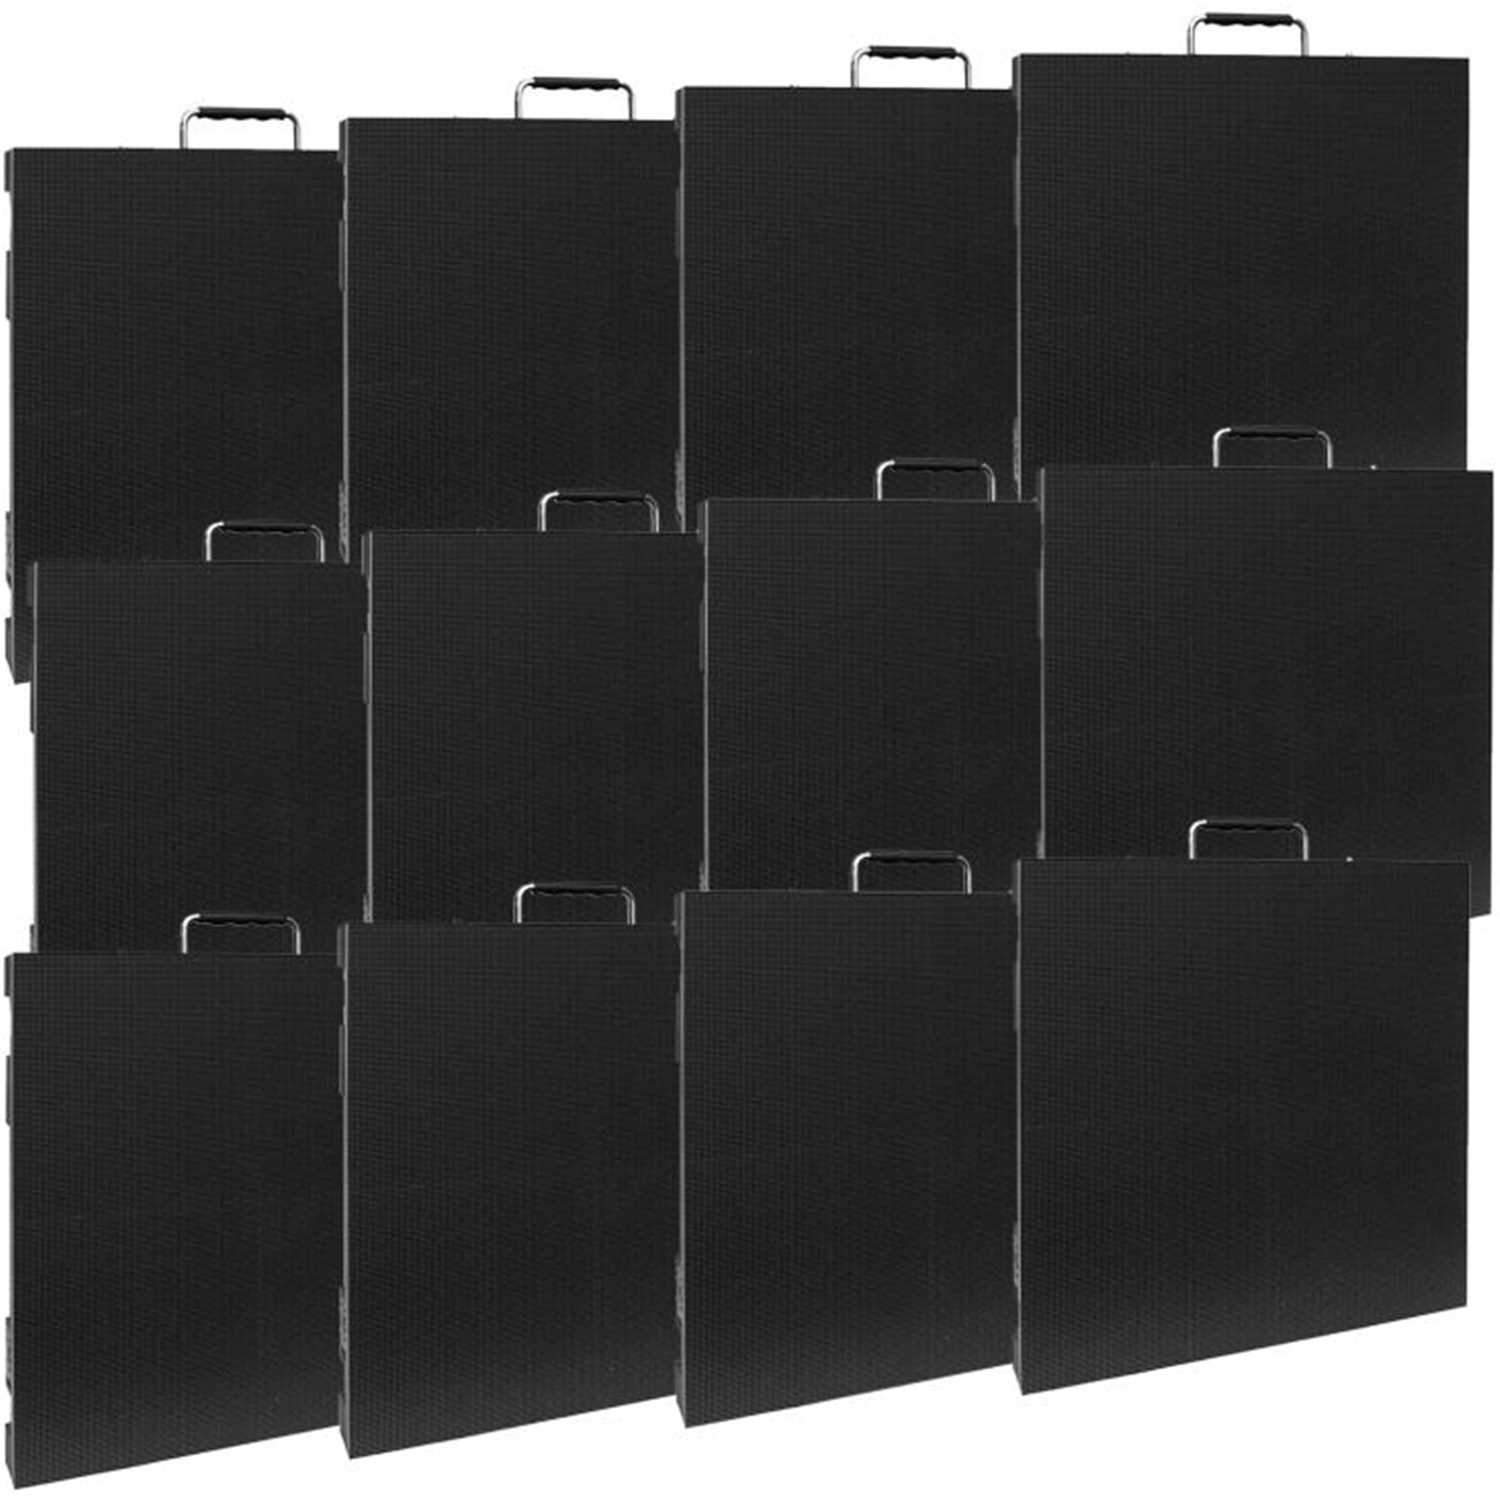 ADJ American DJ AV4IP 4x3 IP Rated Video Wall Kit with 12 Panels - ProSound and Stage Lighting